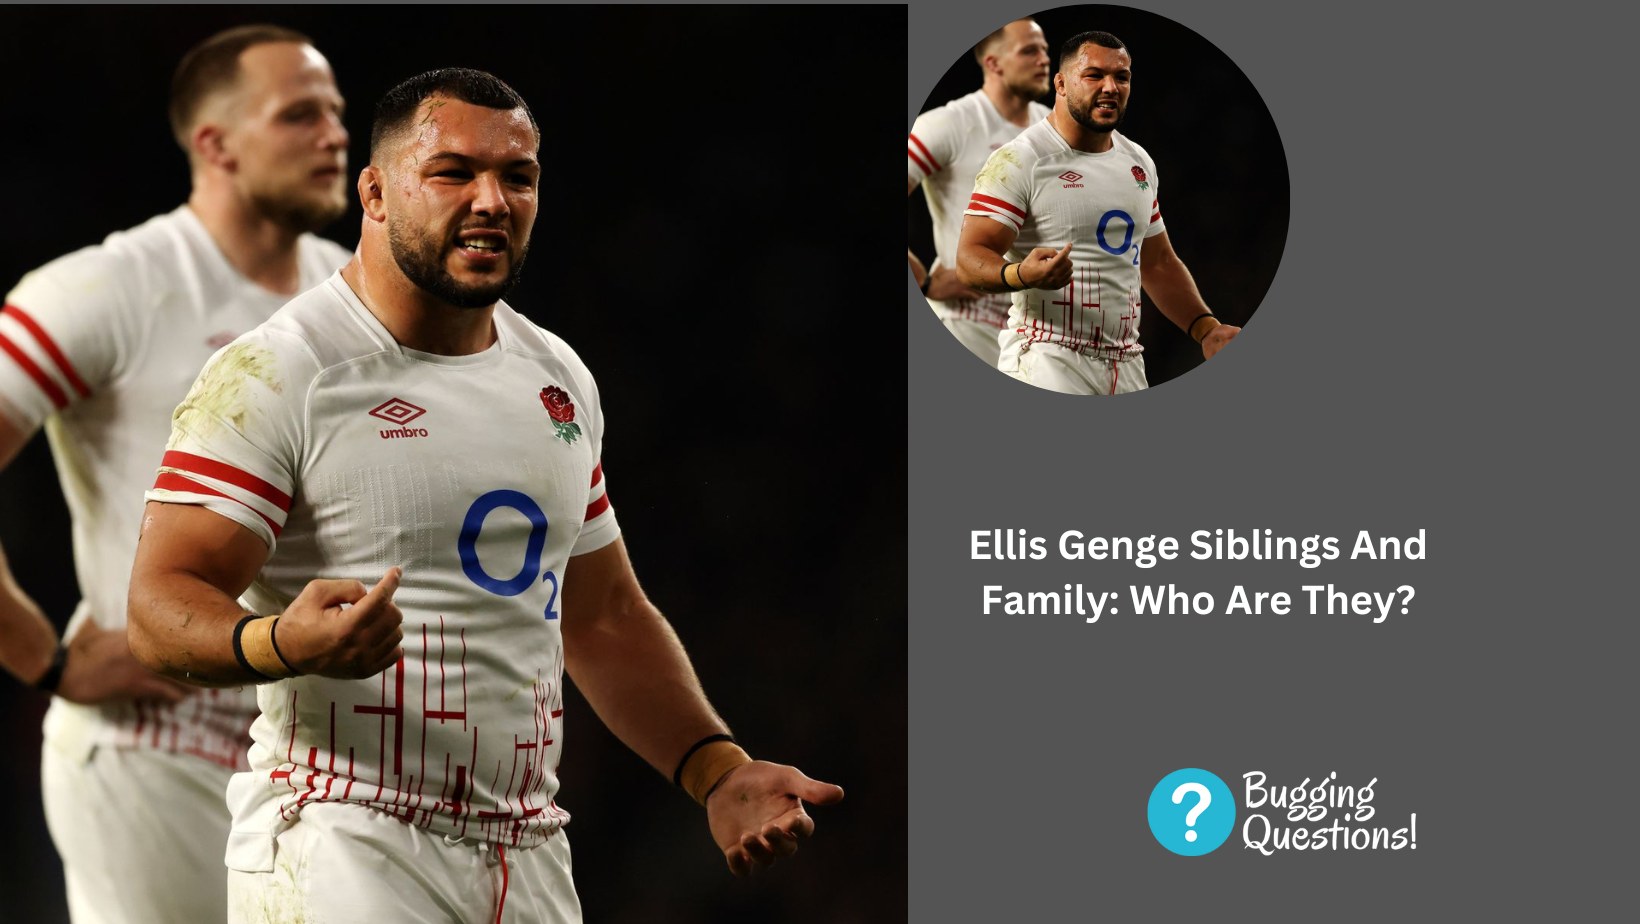 Ellis Genge Siblings And Family: Who Are They?